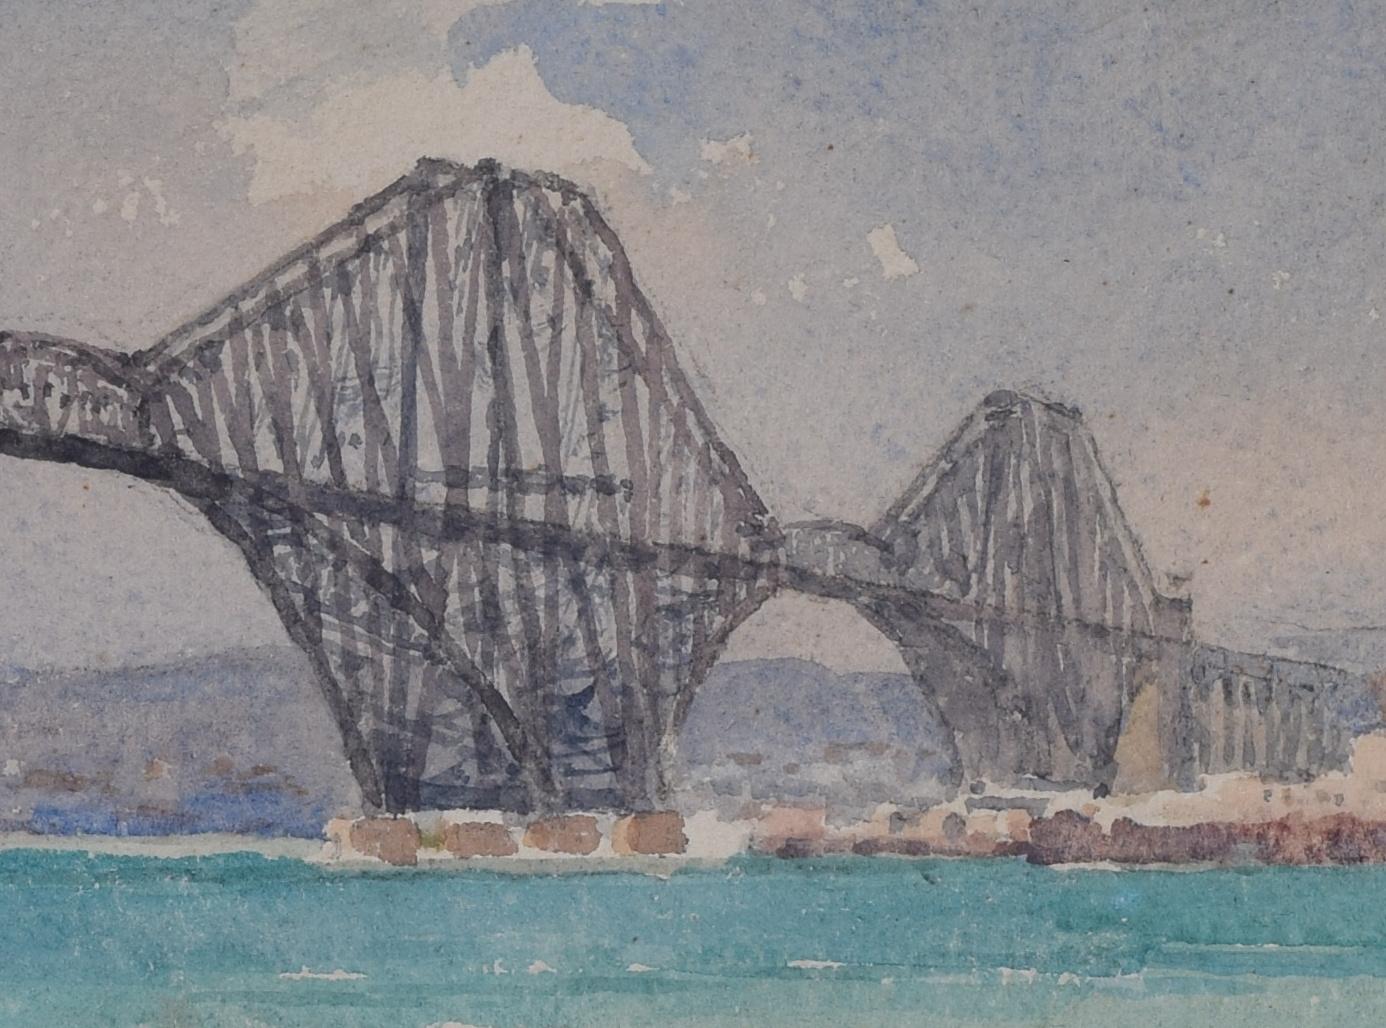 Forth Bridge and Fife Coast by EW Haslehust Scotland, published watercolour - Art by Ernest William Haslehust